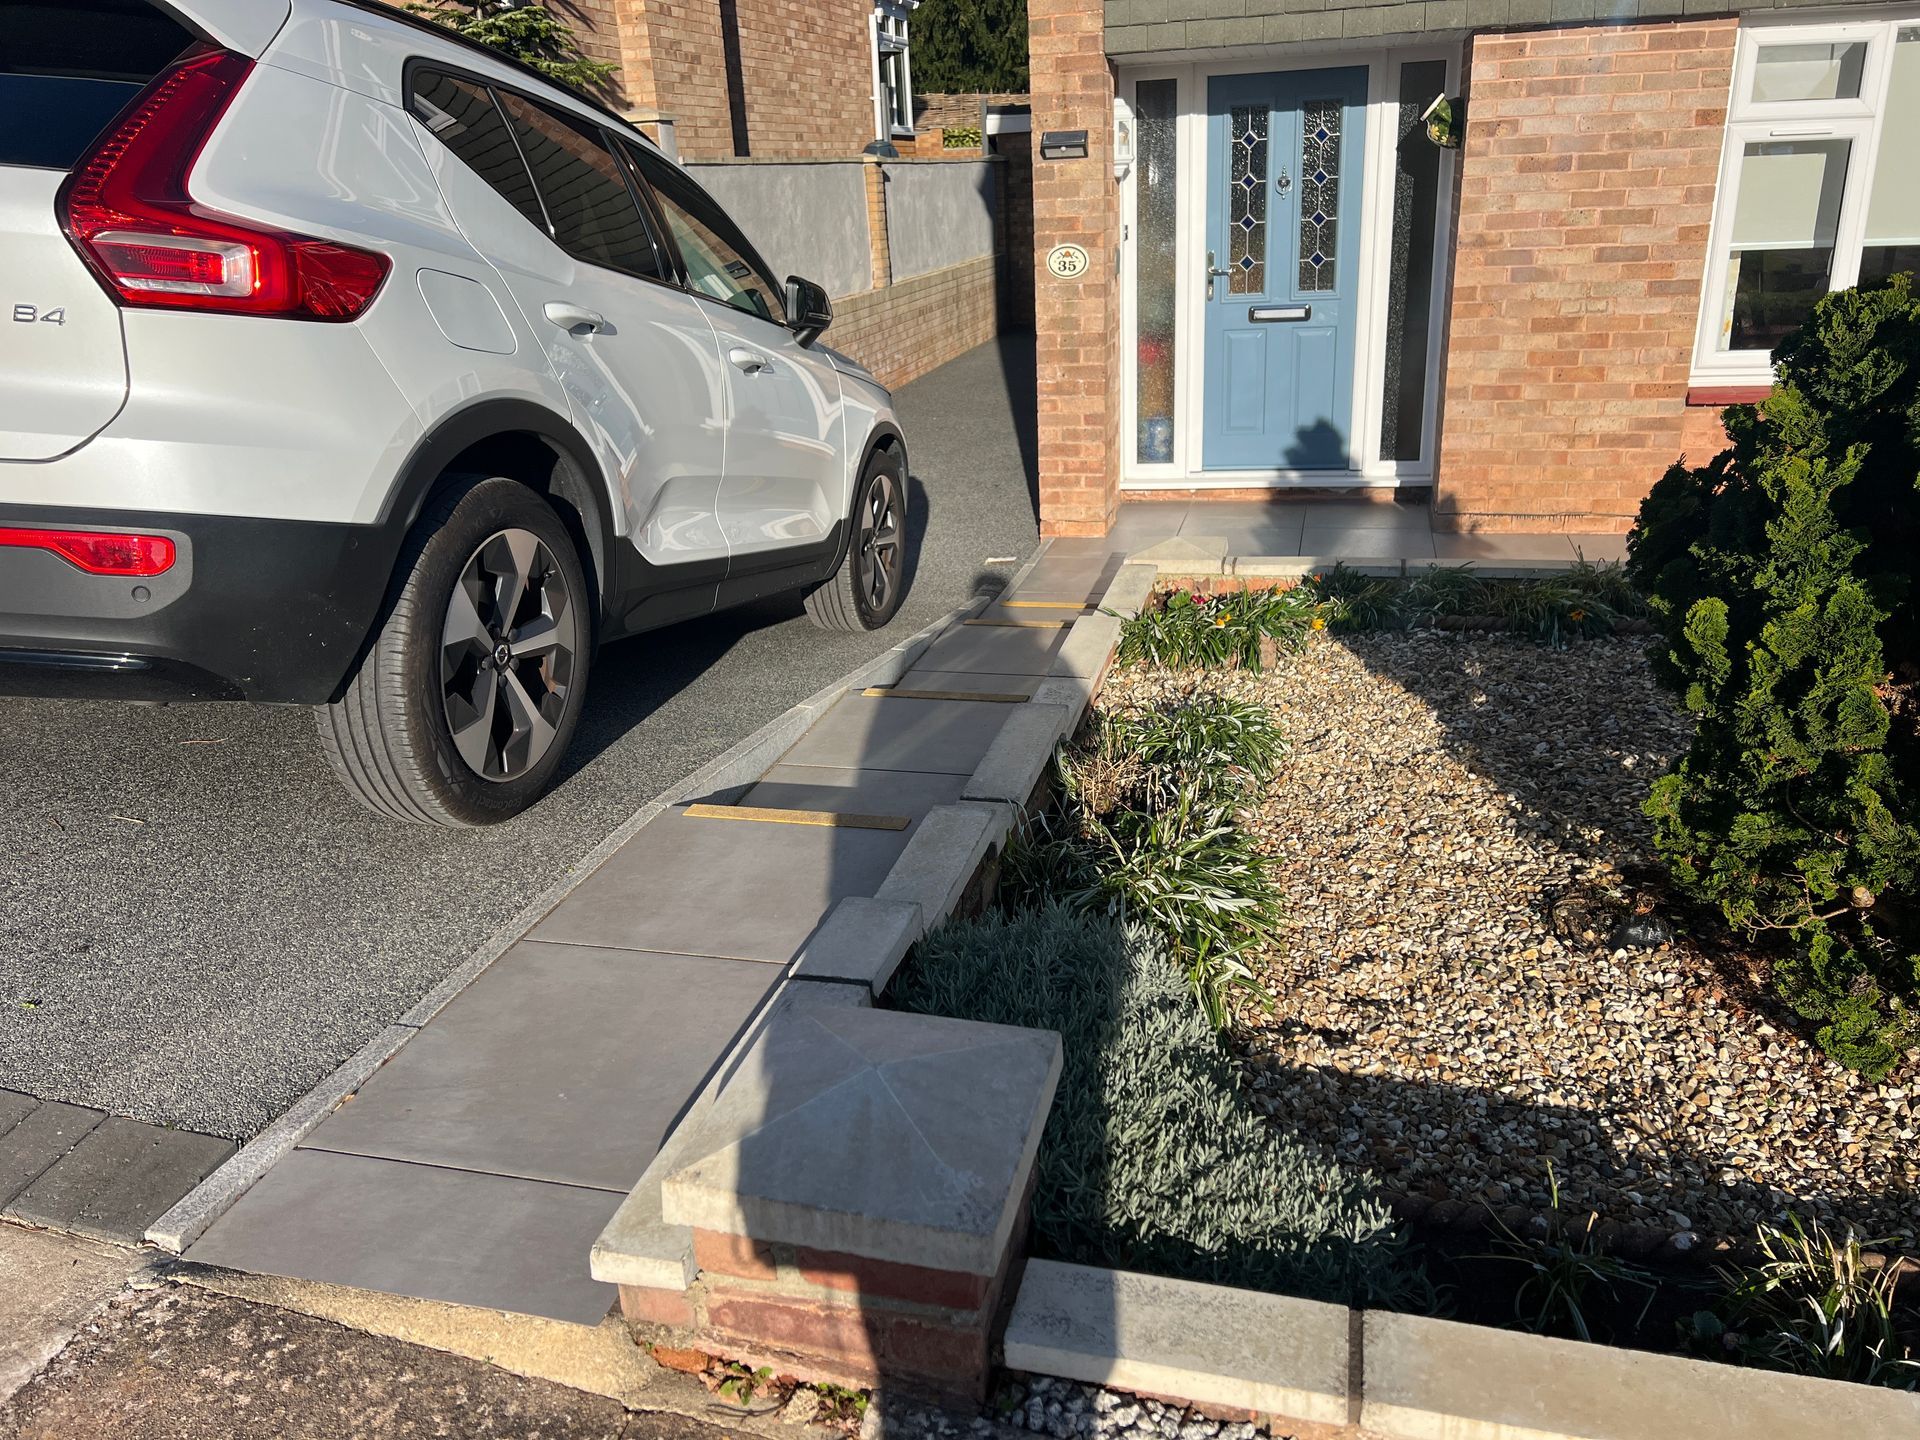 Grey resin driveway with a white car on it, in front of a red brick home.